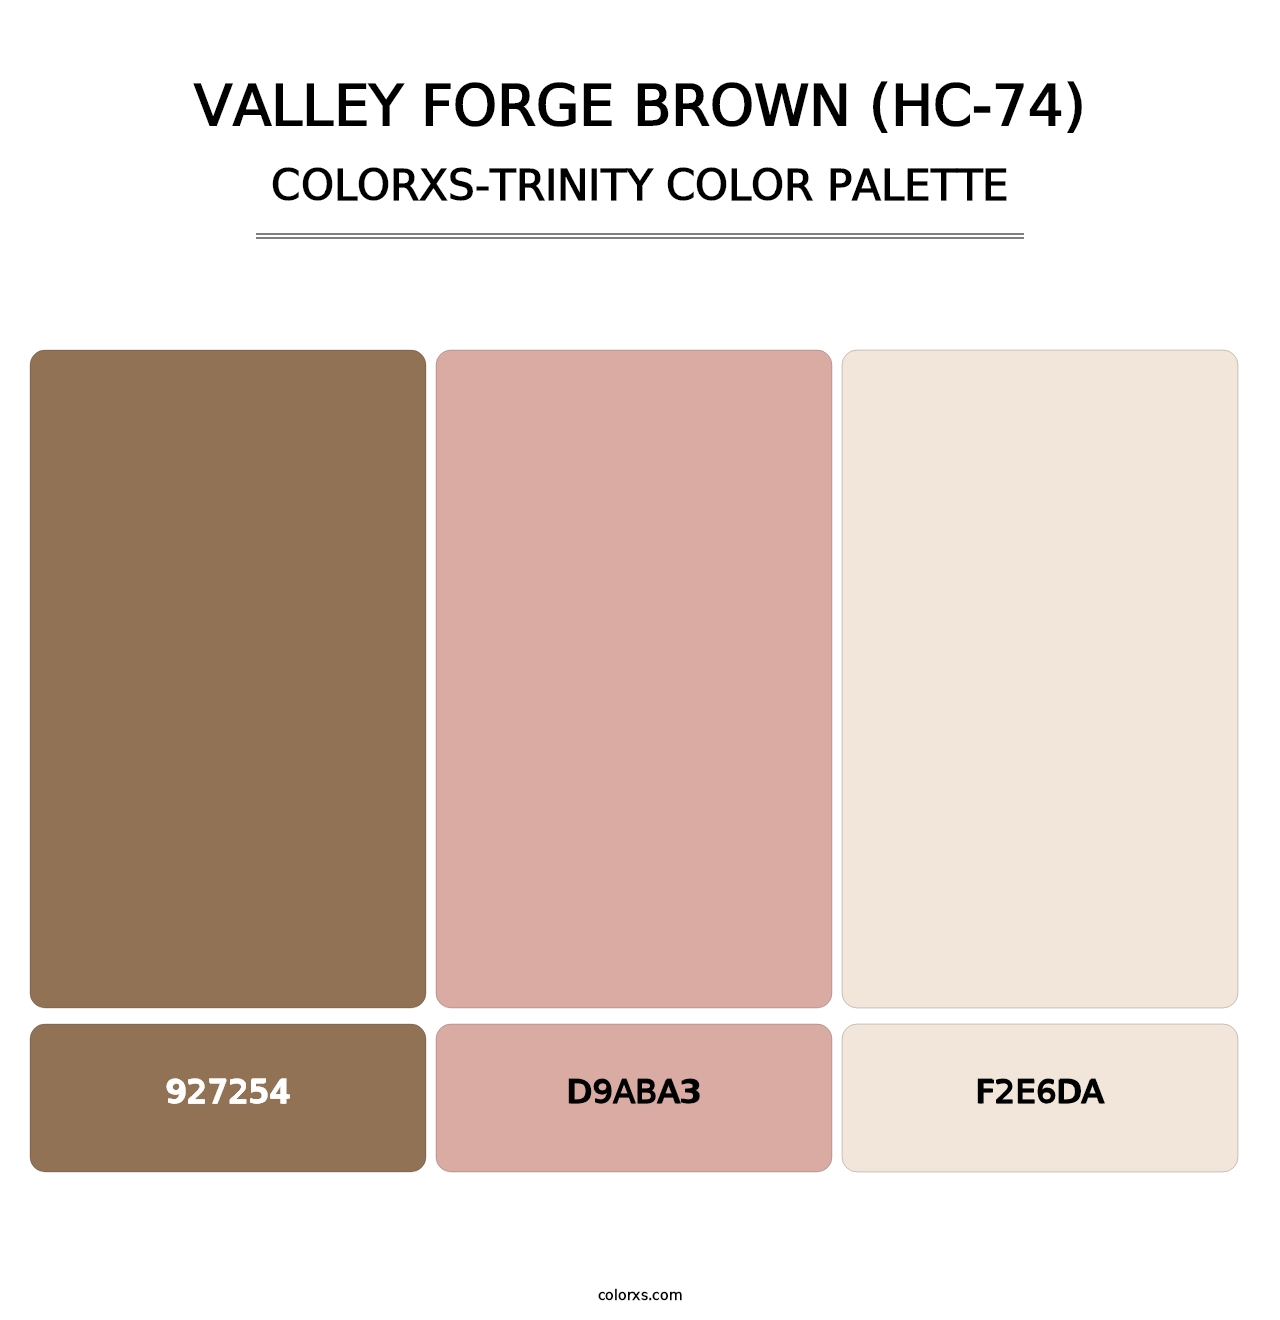 Valley Forge Brown (HC-74) - Colorxs Trinity Palette